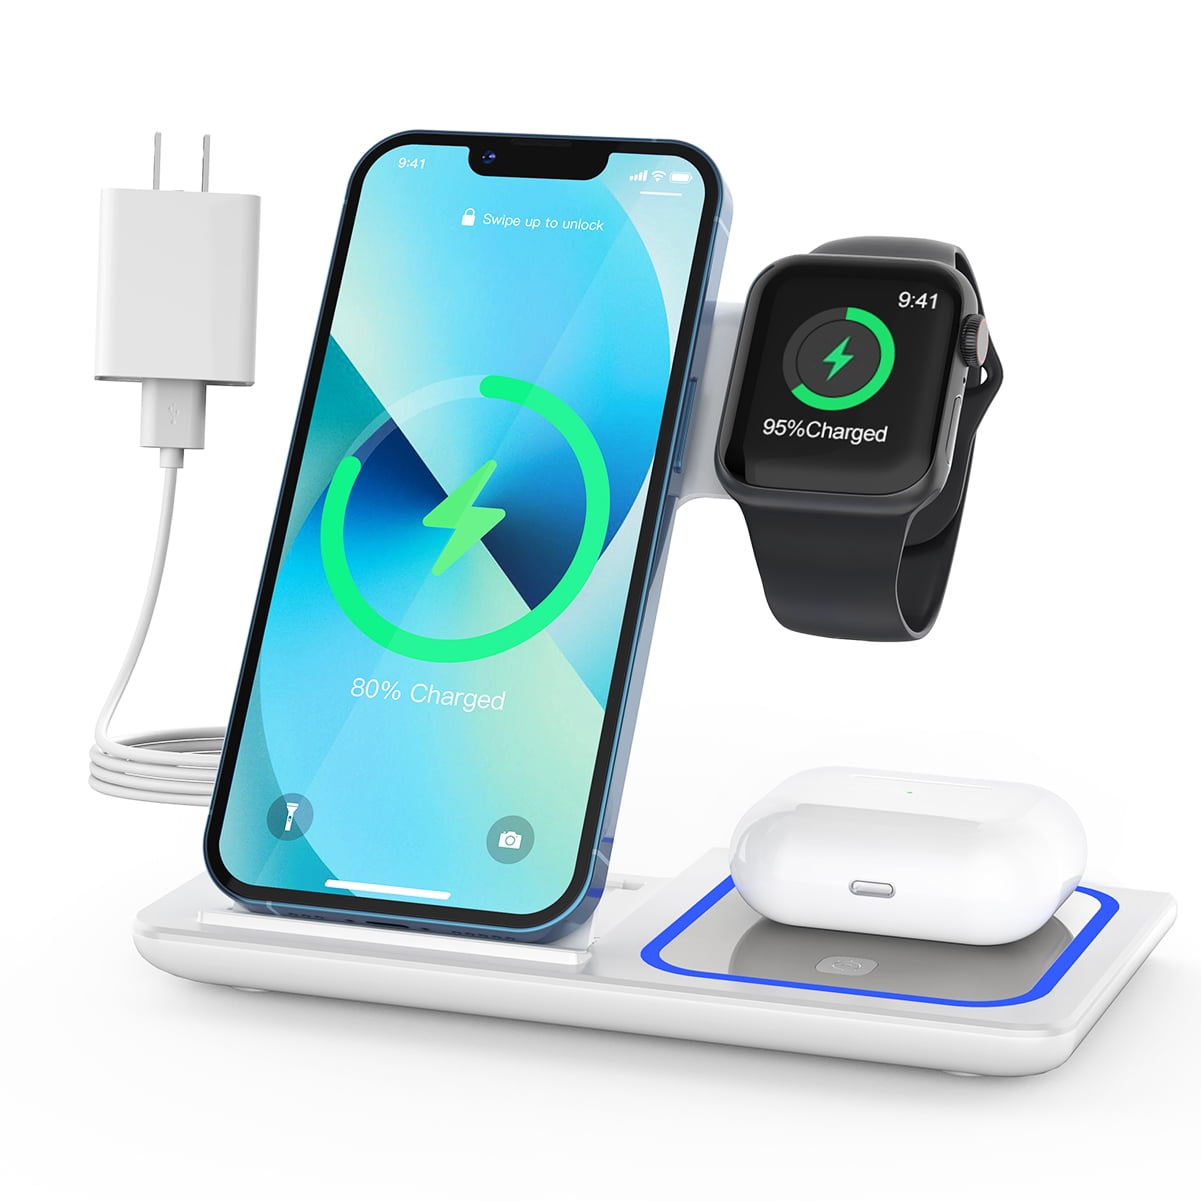 Many dangerous situations Play computer games Enrich Wireless Charger, 3 in 1 Fast Wireless Charging Station with Breathing  Indicator Compatible with IPhone 14/13/12/11 Pro Max/XS, Apple Watch 7/6/5/4,  AirPods 3/2, Samsung Galaxy S20 (with Adapter) - Walmart.com